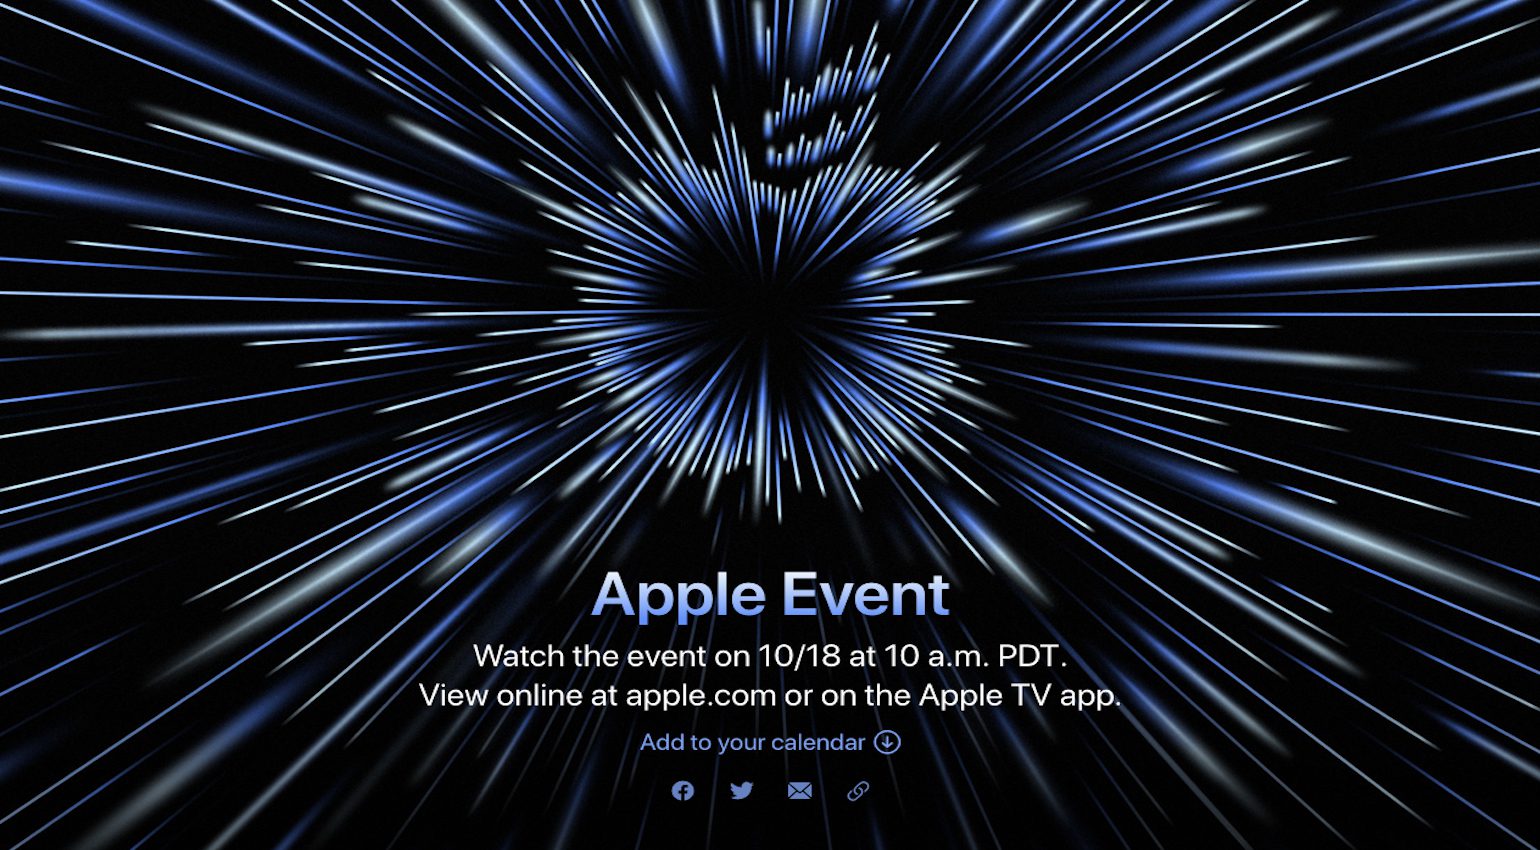 The stage is set for Apple’s M1X Macbook Pro release on October 18